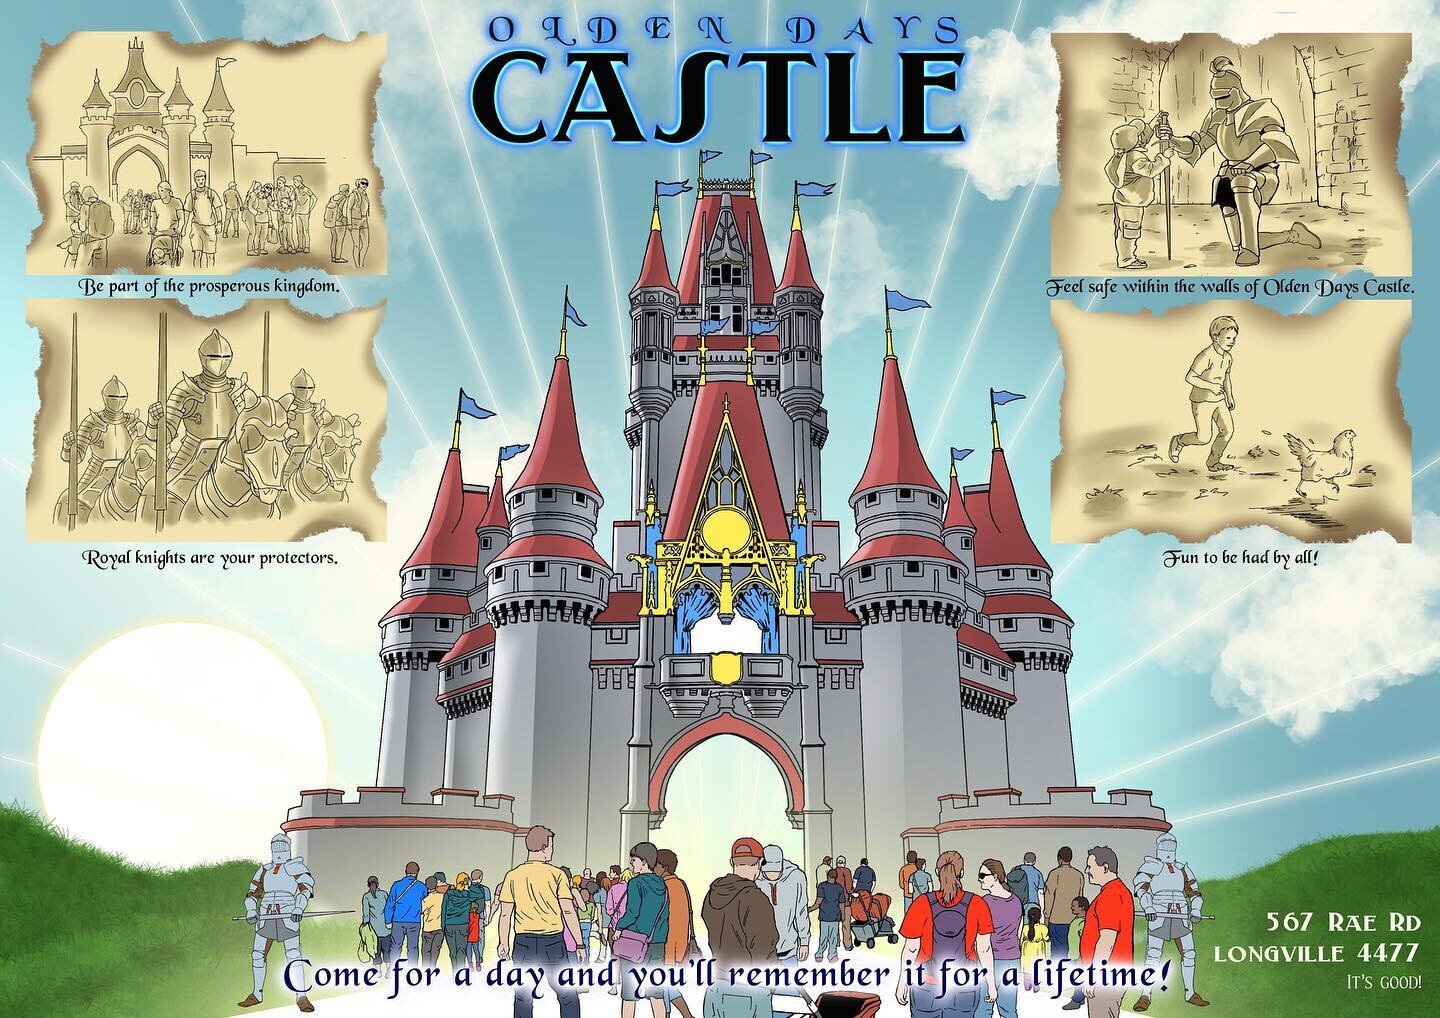 The Medieval fun park &ldquo;Olden Days Castle&rdquo; from the film RESIDENCE. Thanks to artist Darryl Leech for designing this for us to use this weekend of shooting!